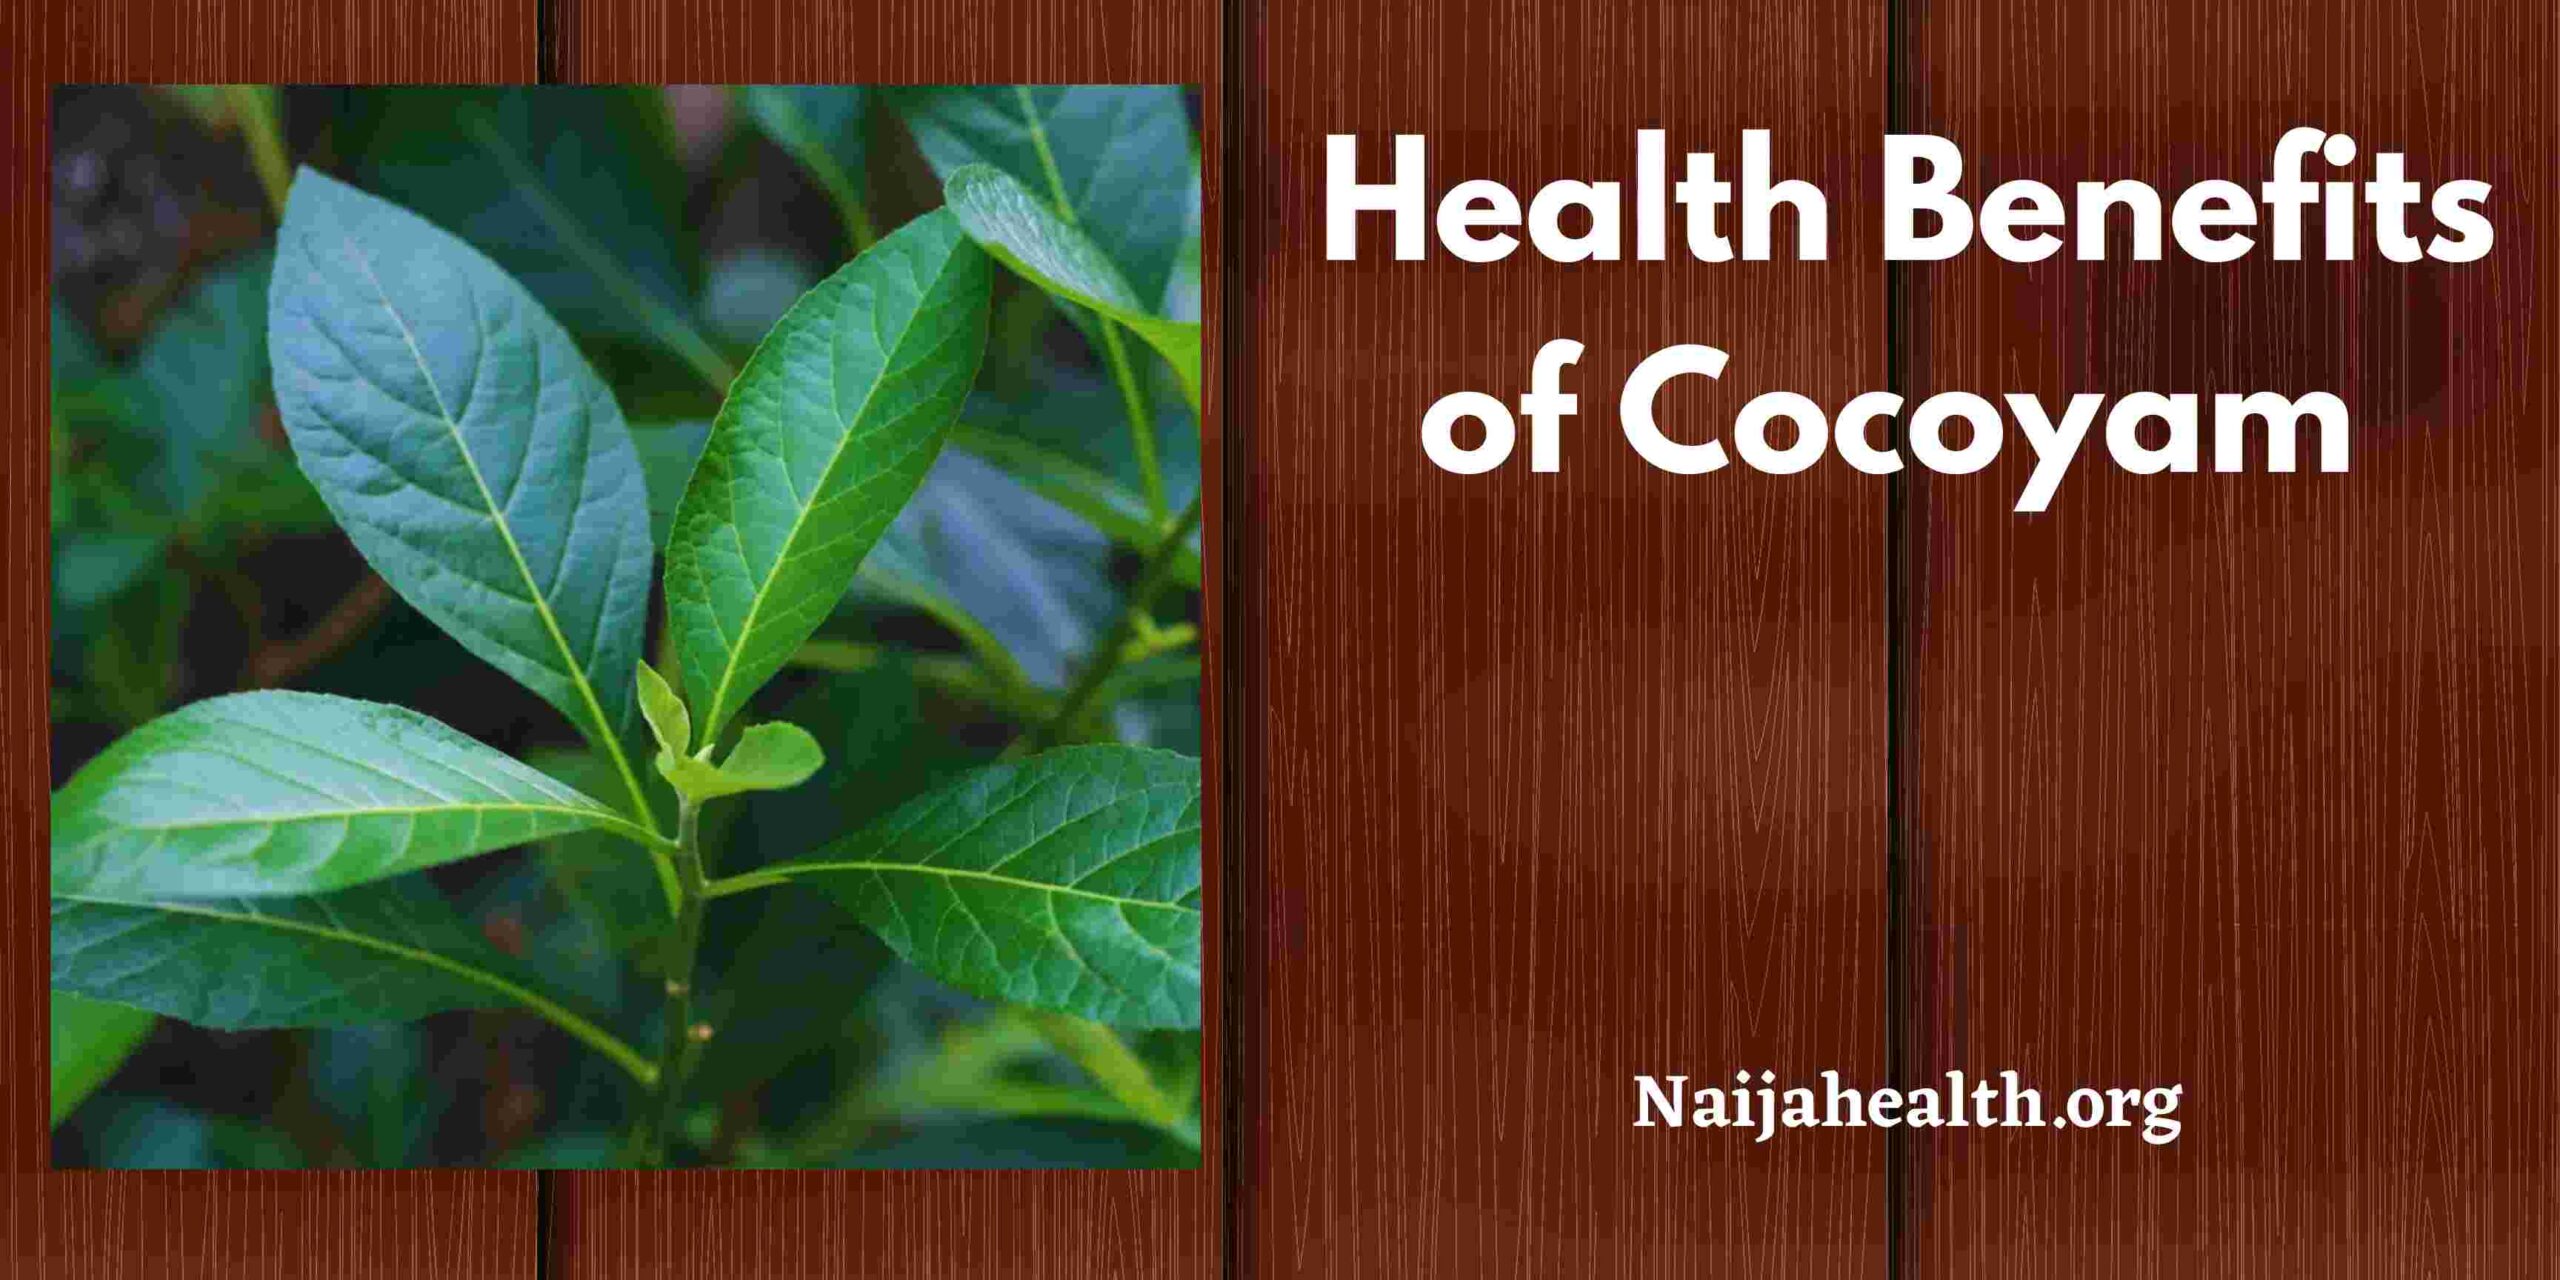 Health Benefits of Cocoyam - Nutritional Value And Cocoyam Recipes